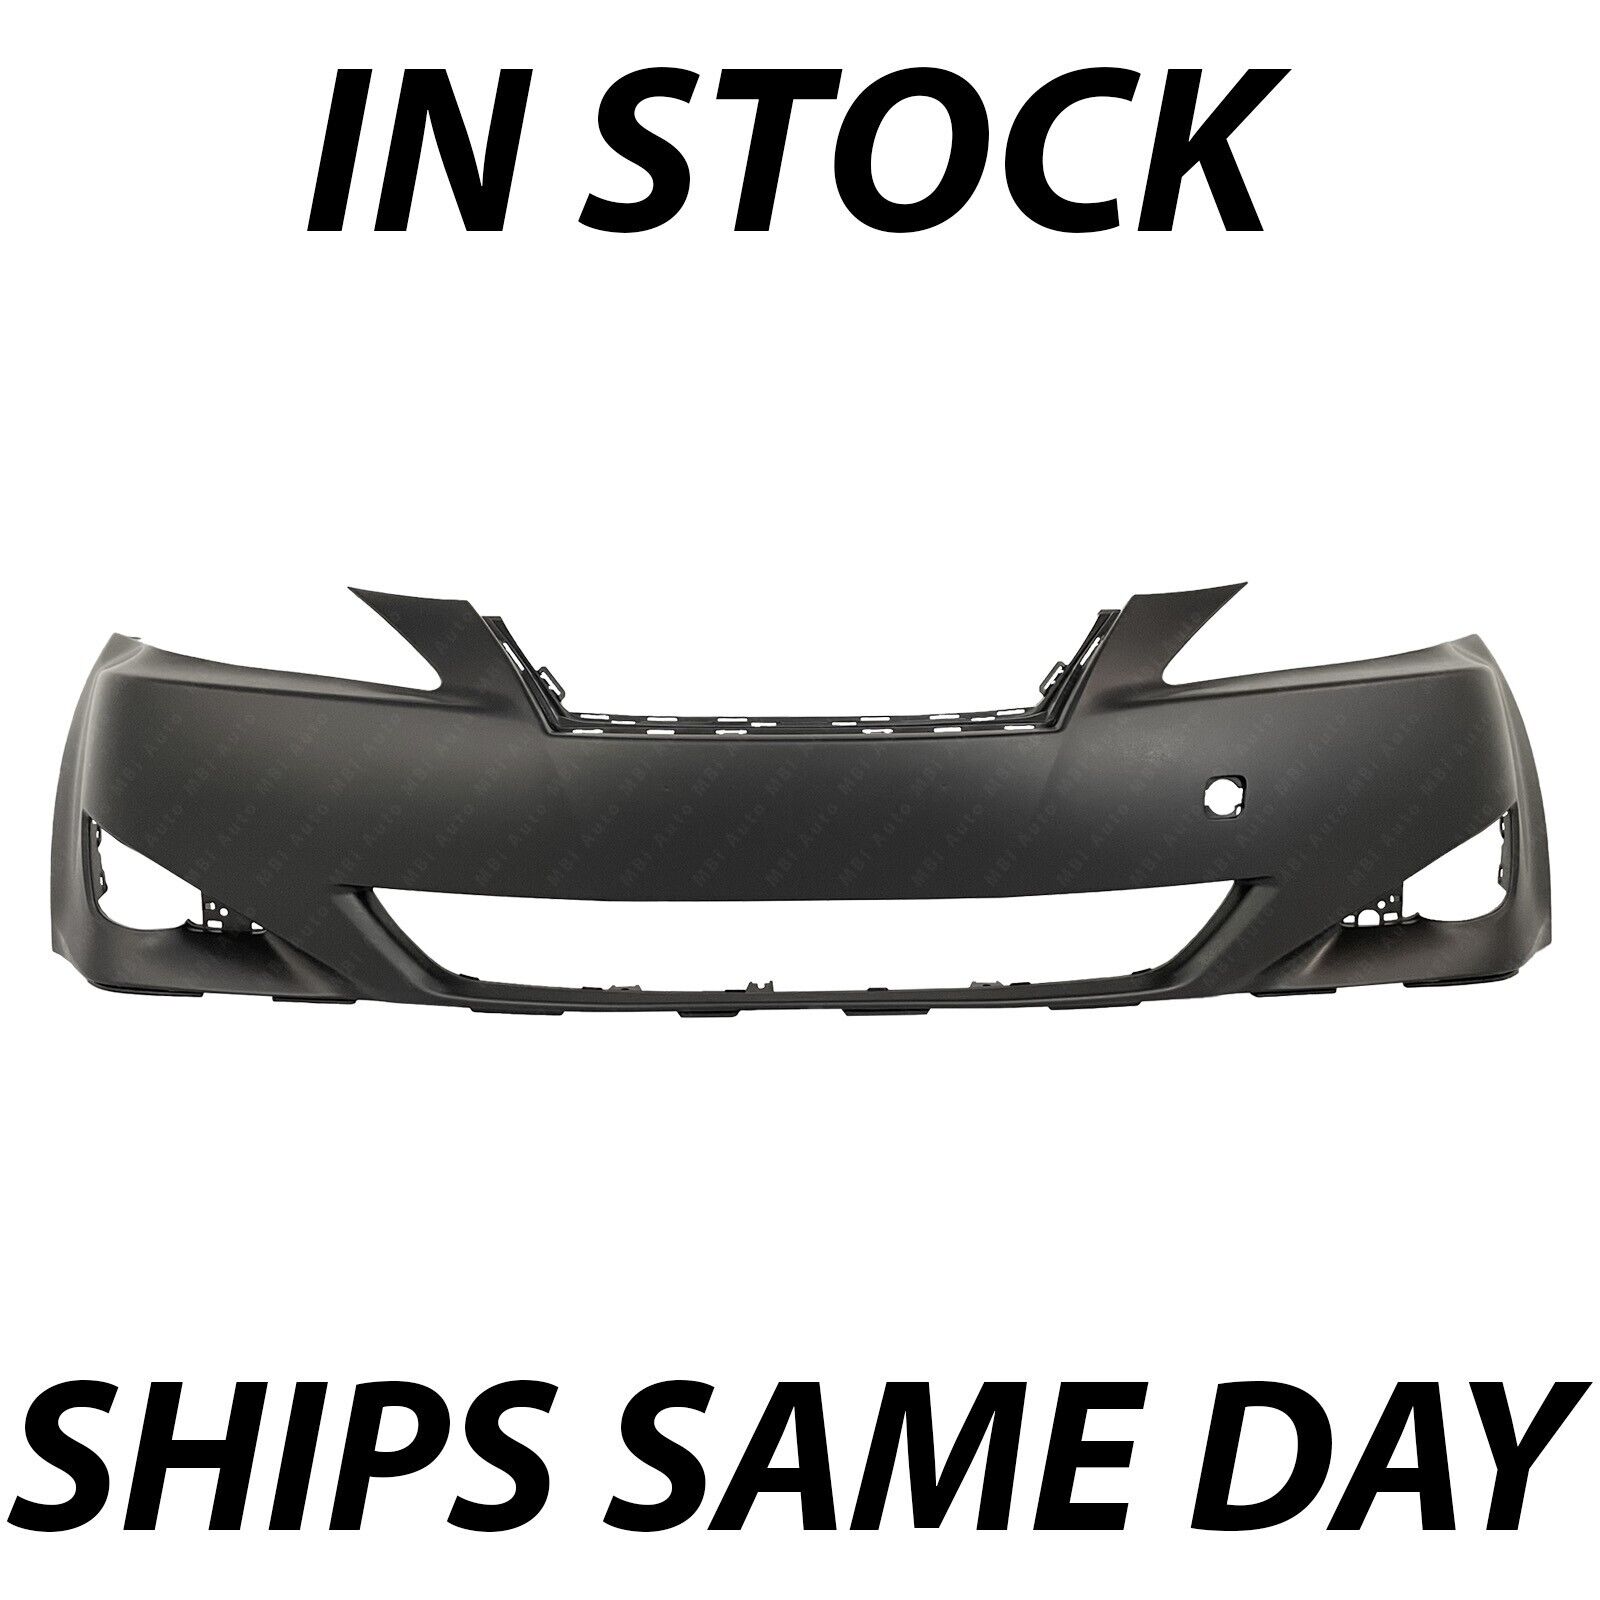 NEW Primered - Front Bumper Cover for 2006 2007 2008 Lexus IS250 IS350 06 07 08